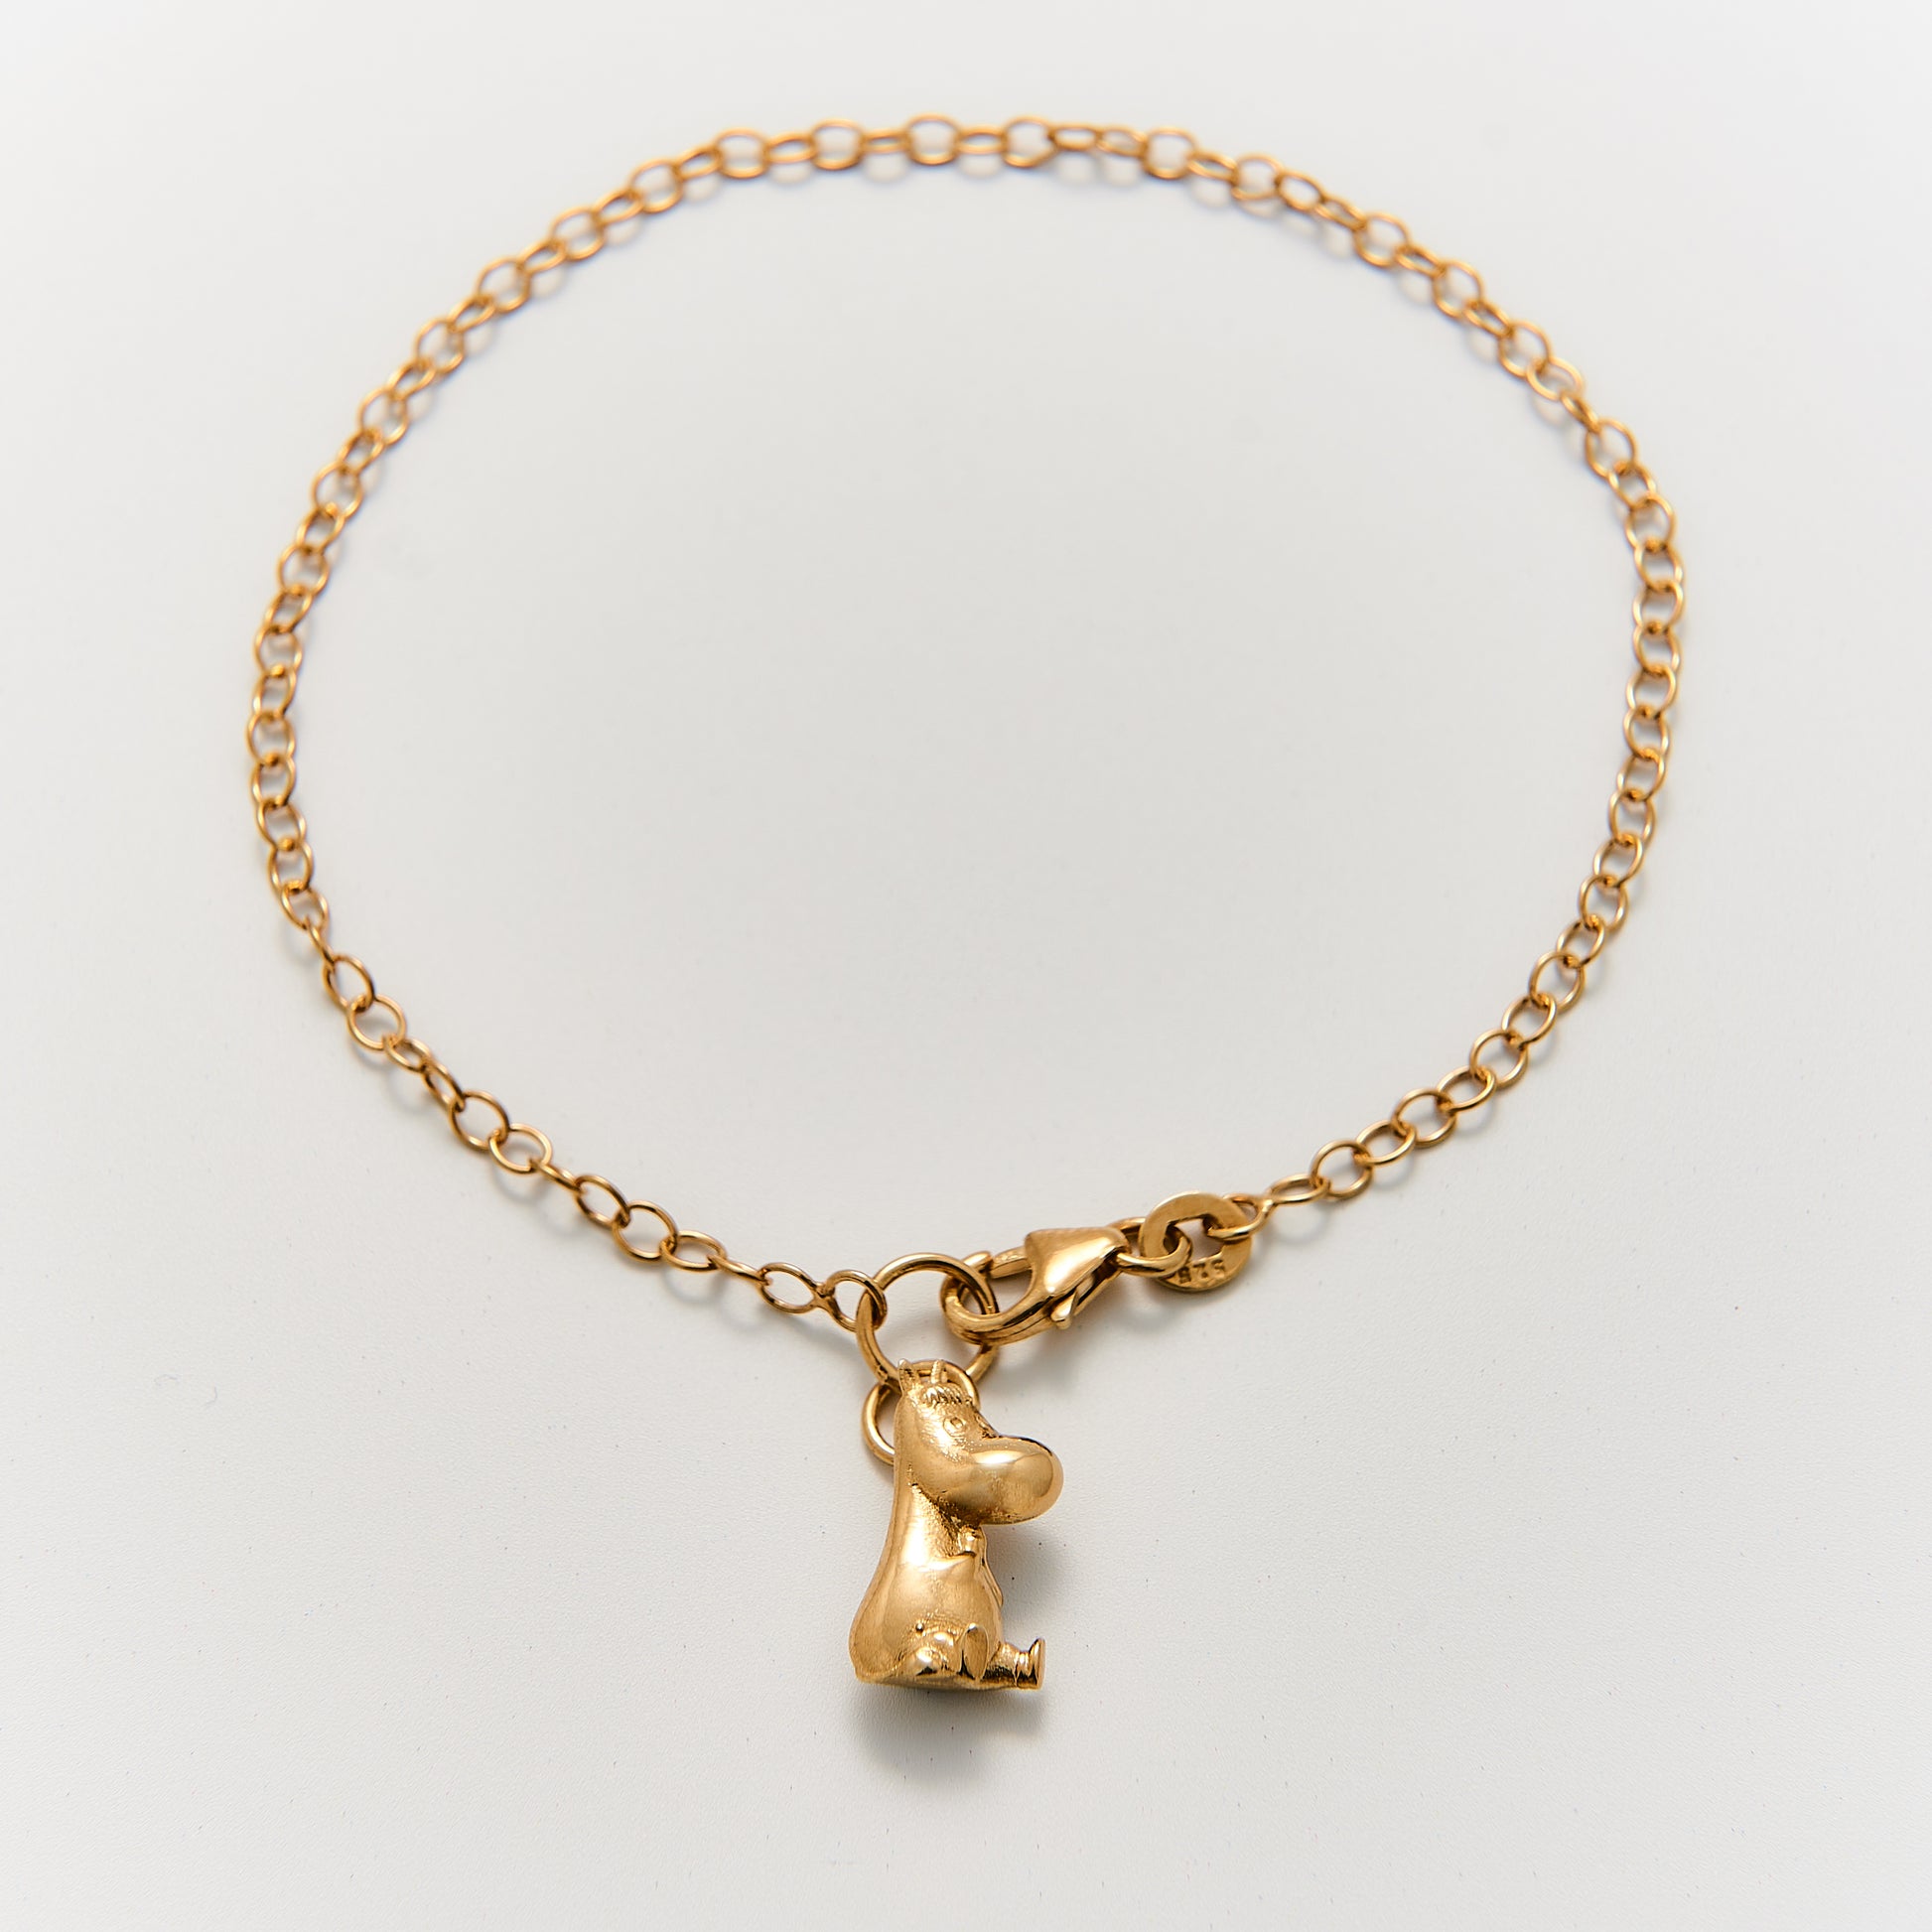 Handcrafted 18ct Gold Vermeil Snorkmaiden bracelet from the Moomins, featuring the character's signature curly hair and gold anklet, made from recycled sterling silver.